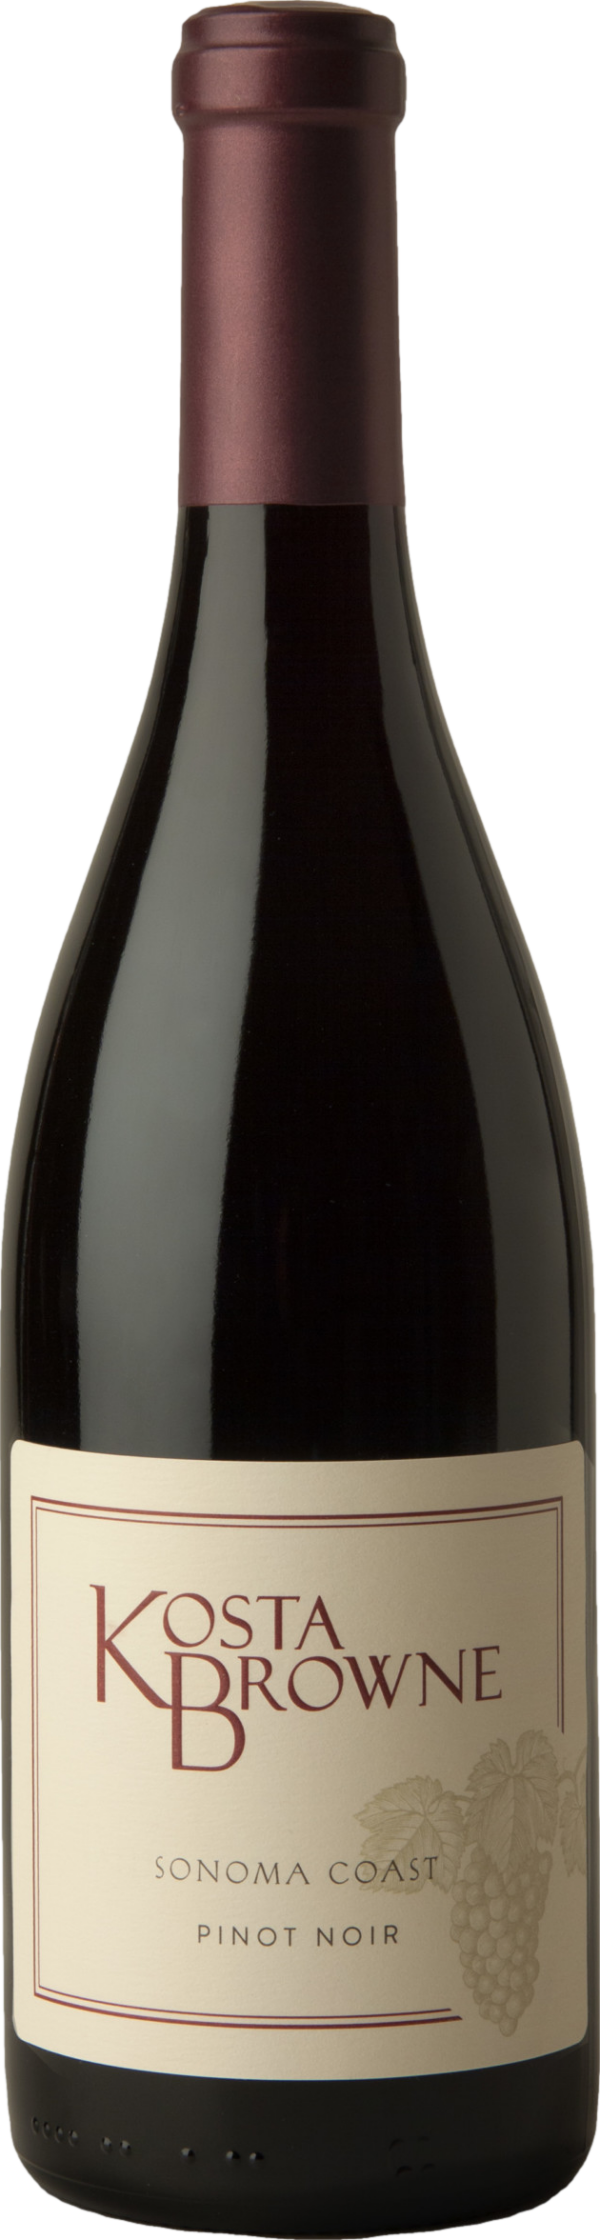 Product image of Kosta Browne Sonoma Coast Pinot Noir 2021 from 8wines